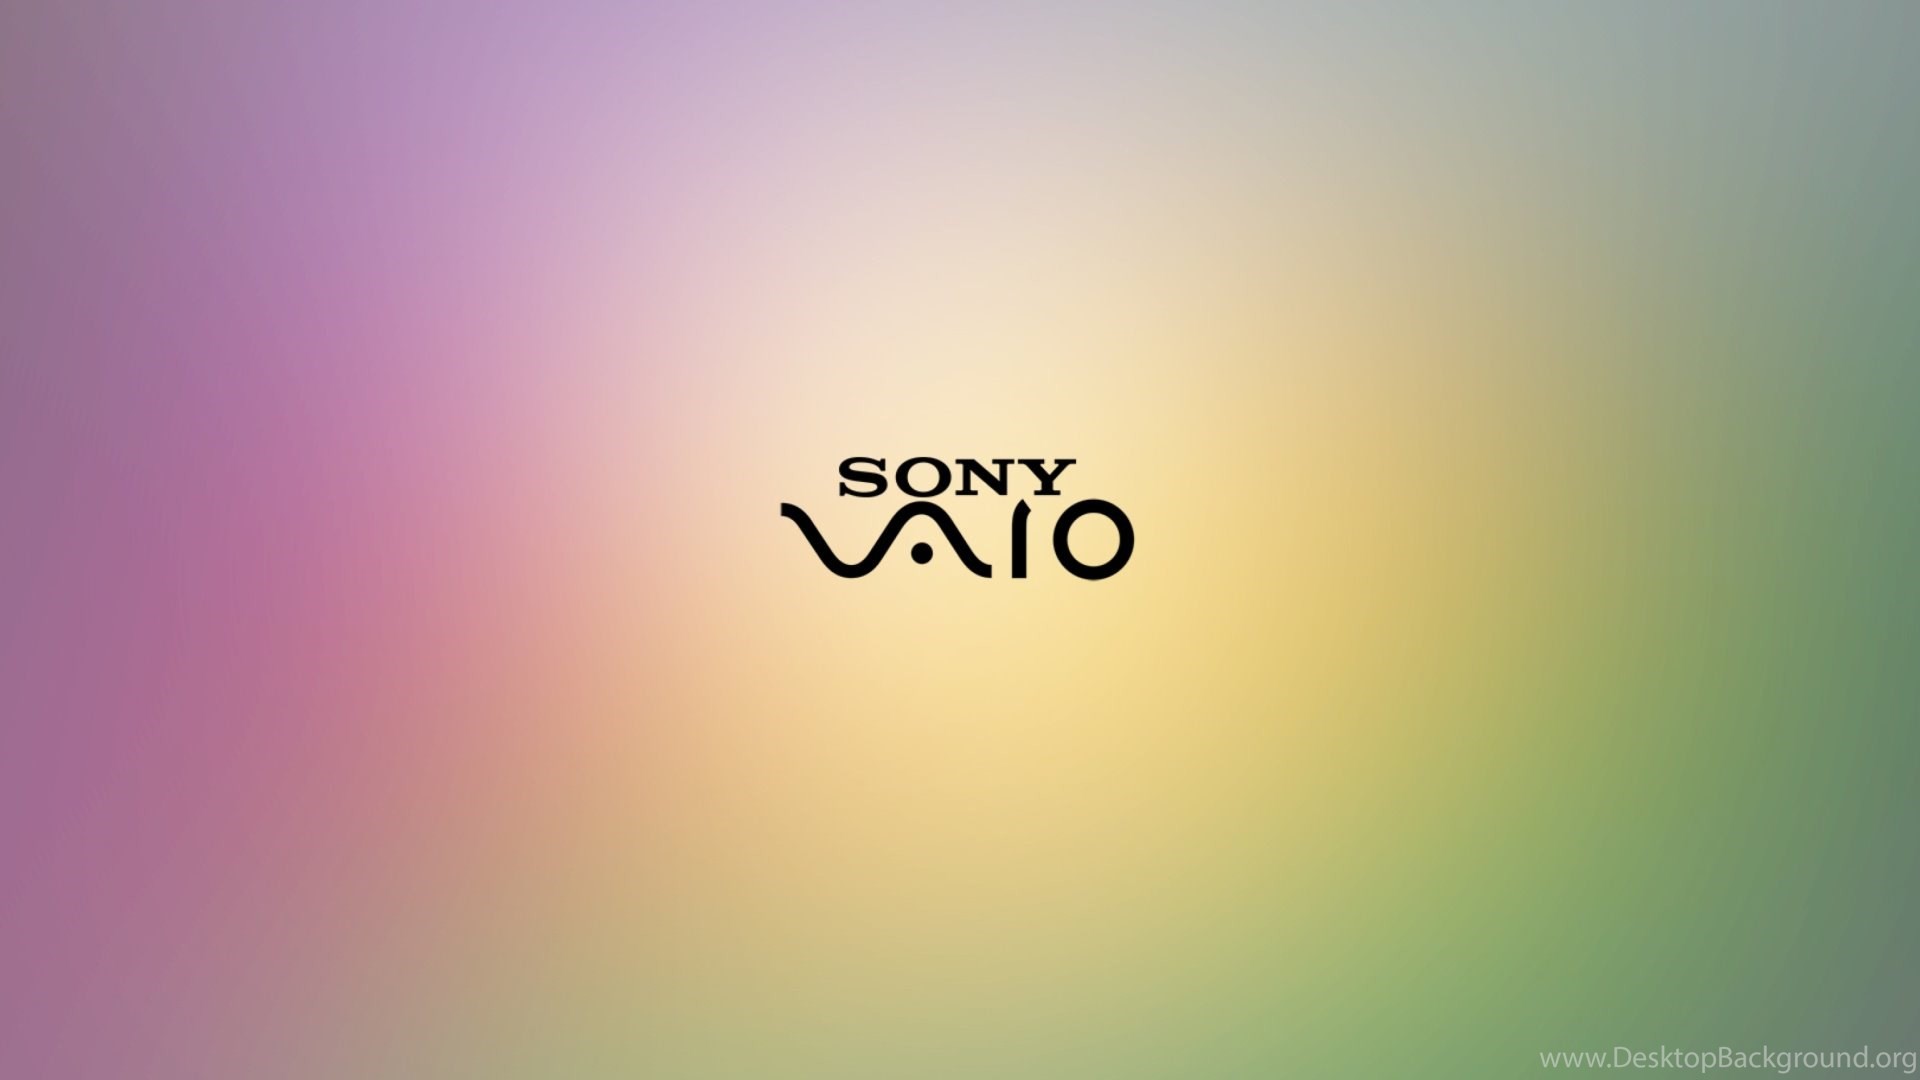 1920x1080 Sony Vaio Wallpapers For Desktop  Full HD